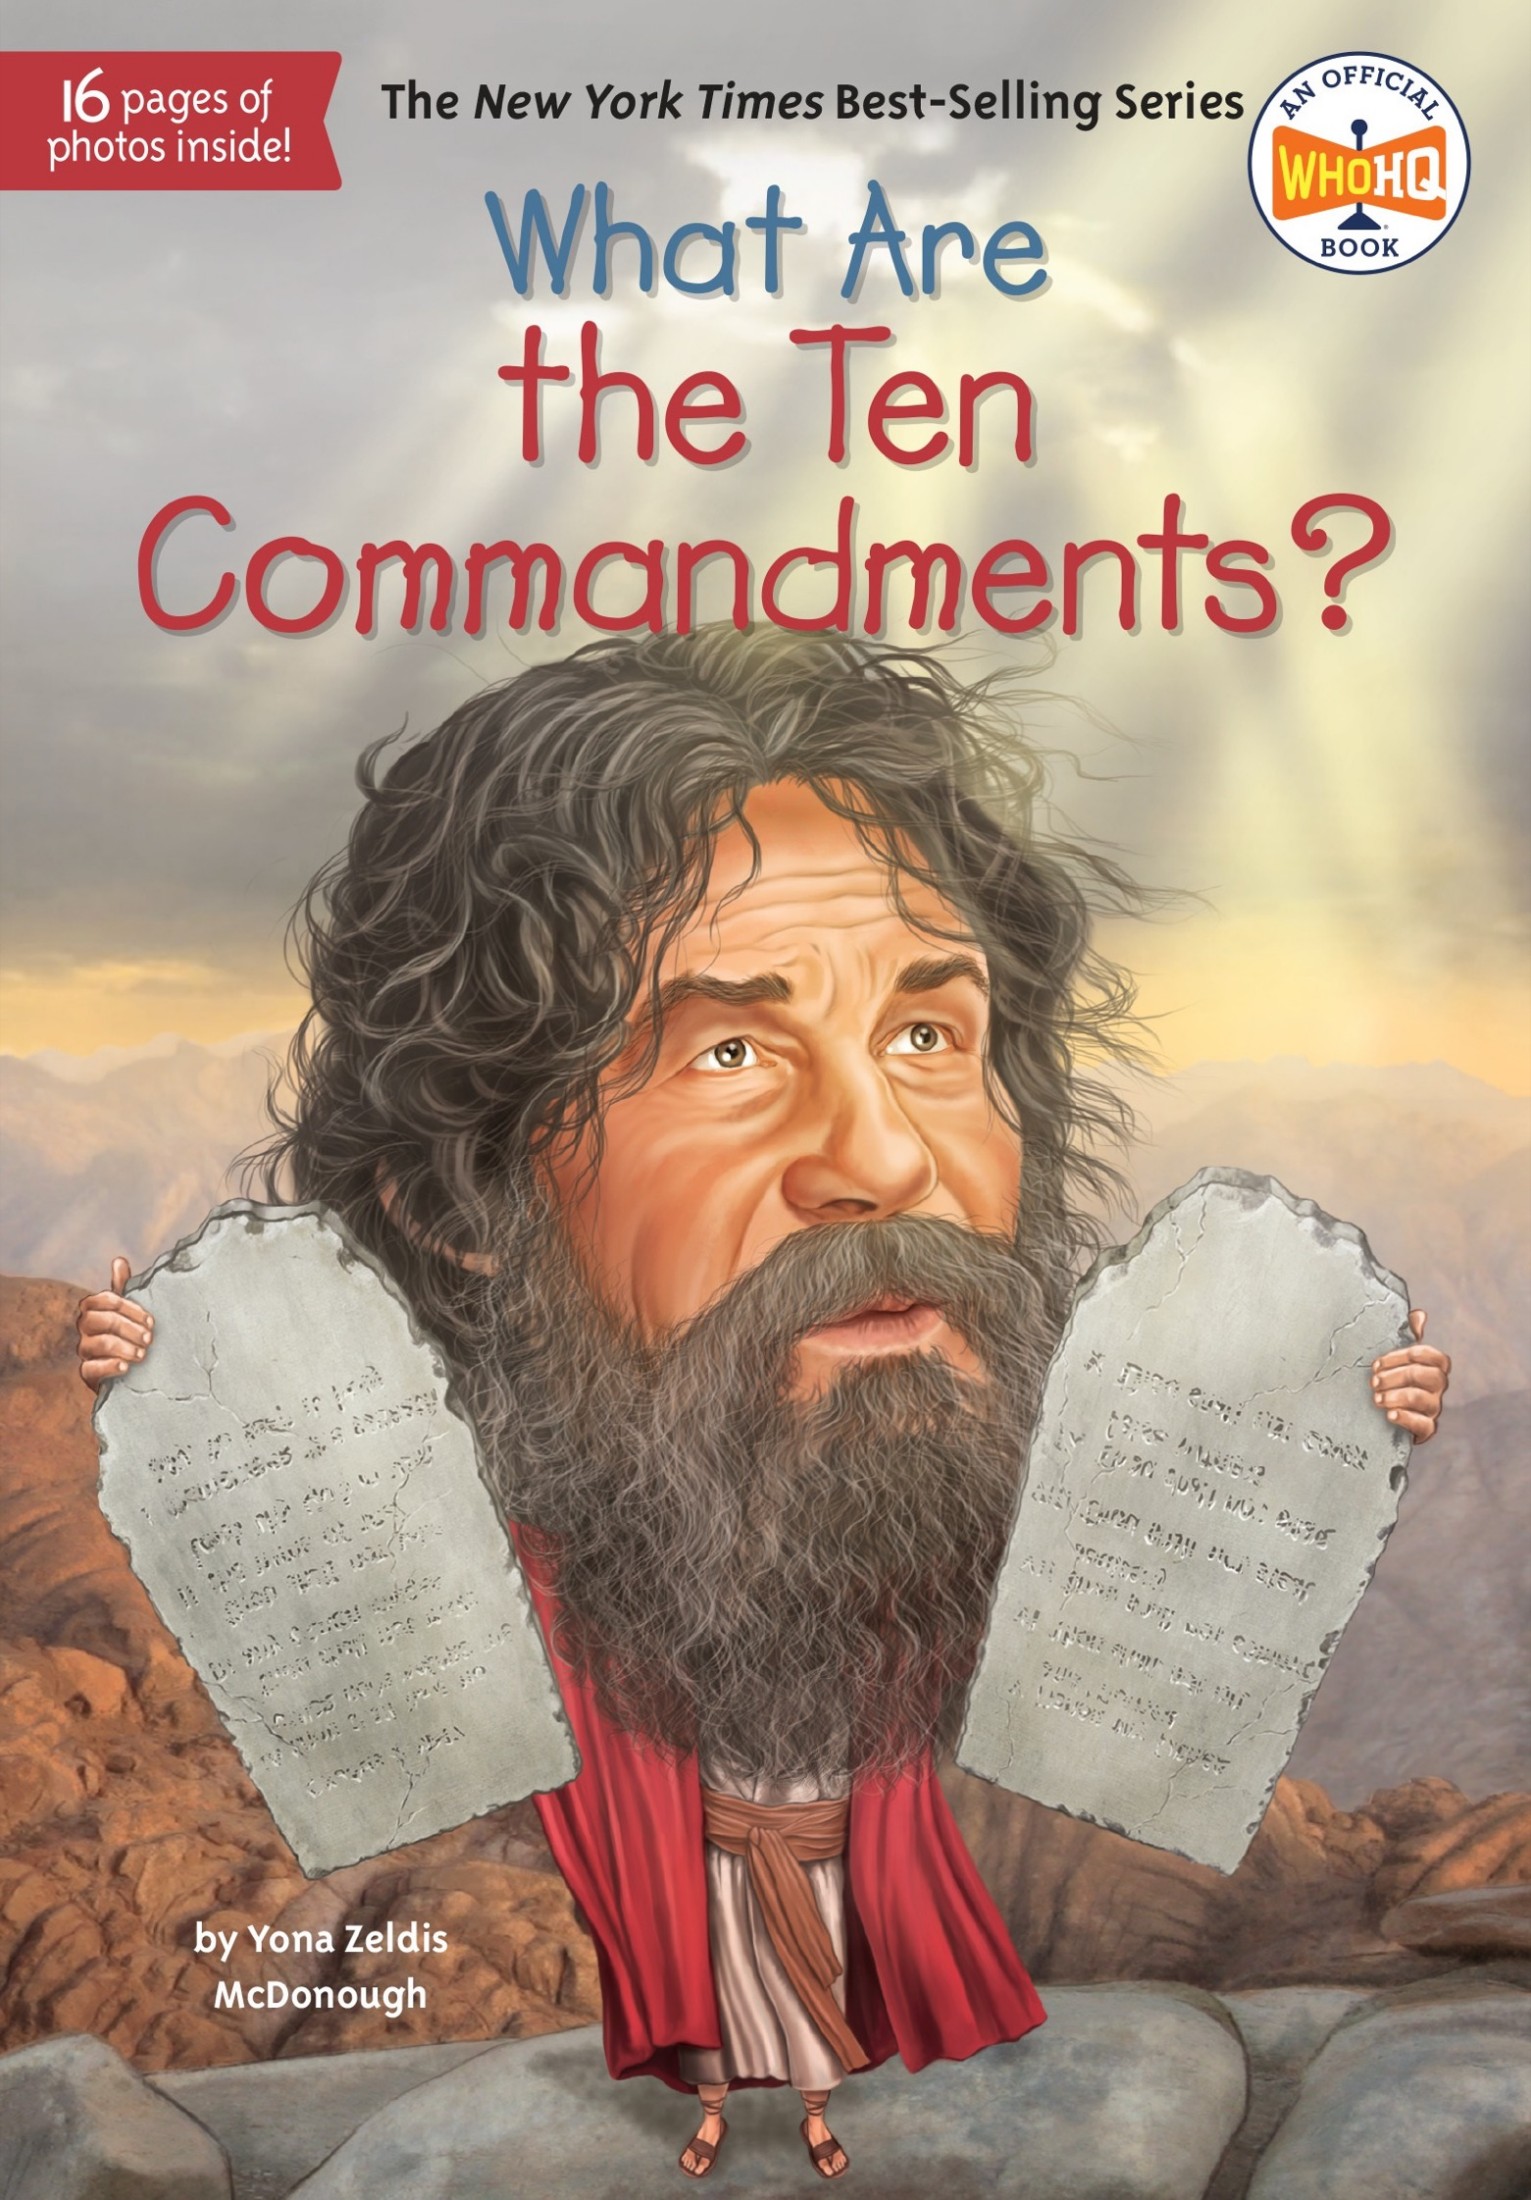 What Are the Ten Commandments - image 1